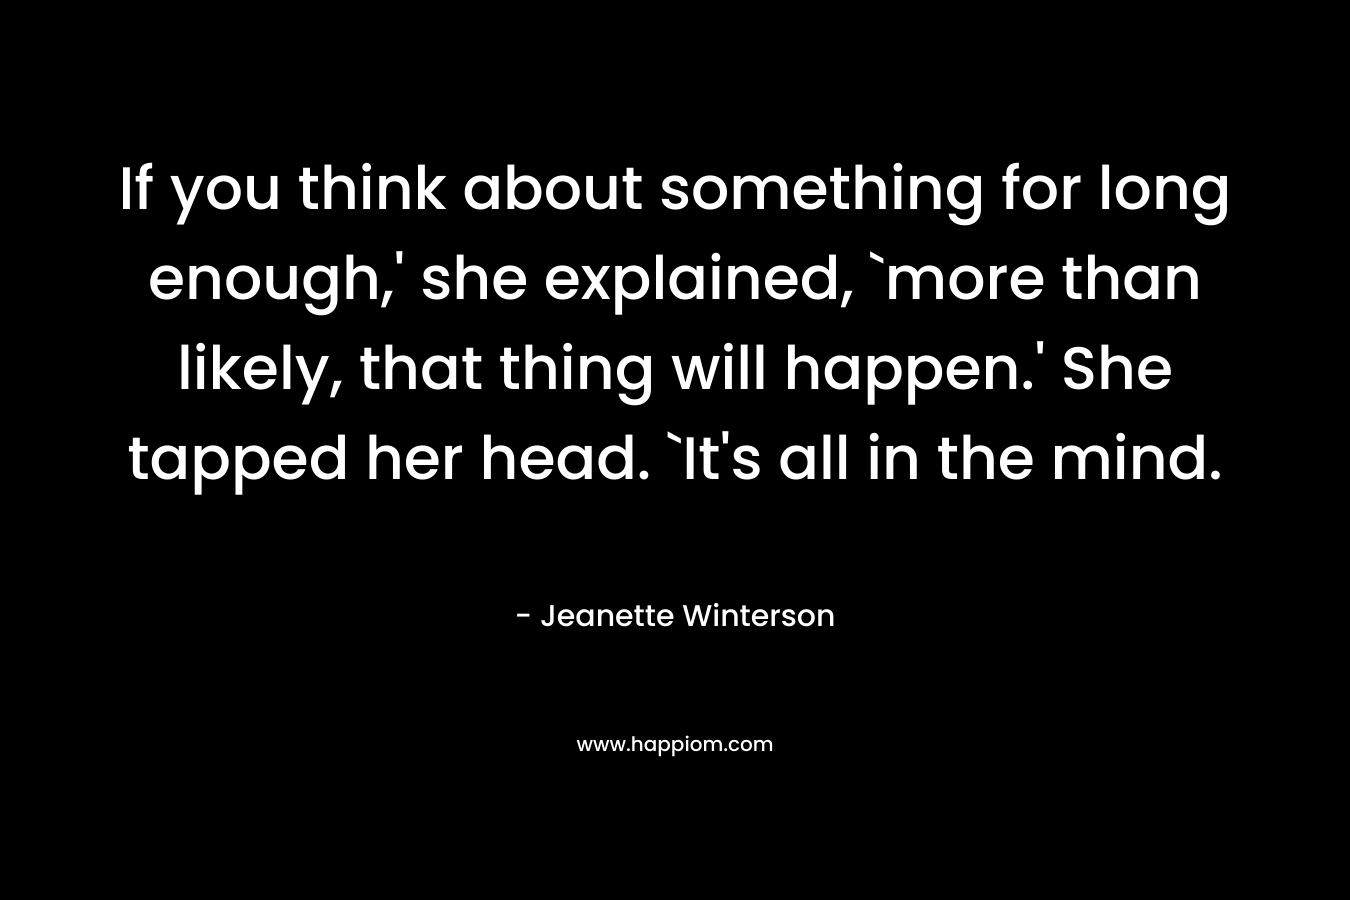 If you think about something for long enough,’ she explained, `more than likely, that thing will happen.’ She tapped her head. `It’s all in the mind. – Jeanette Winterson